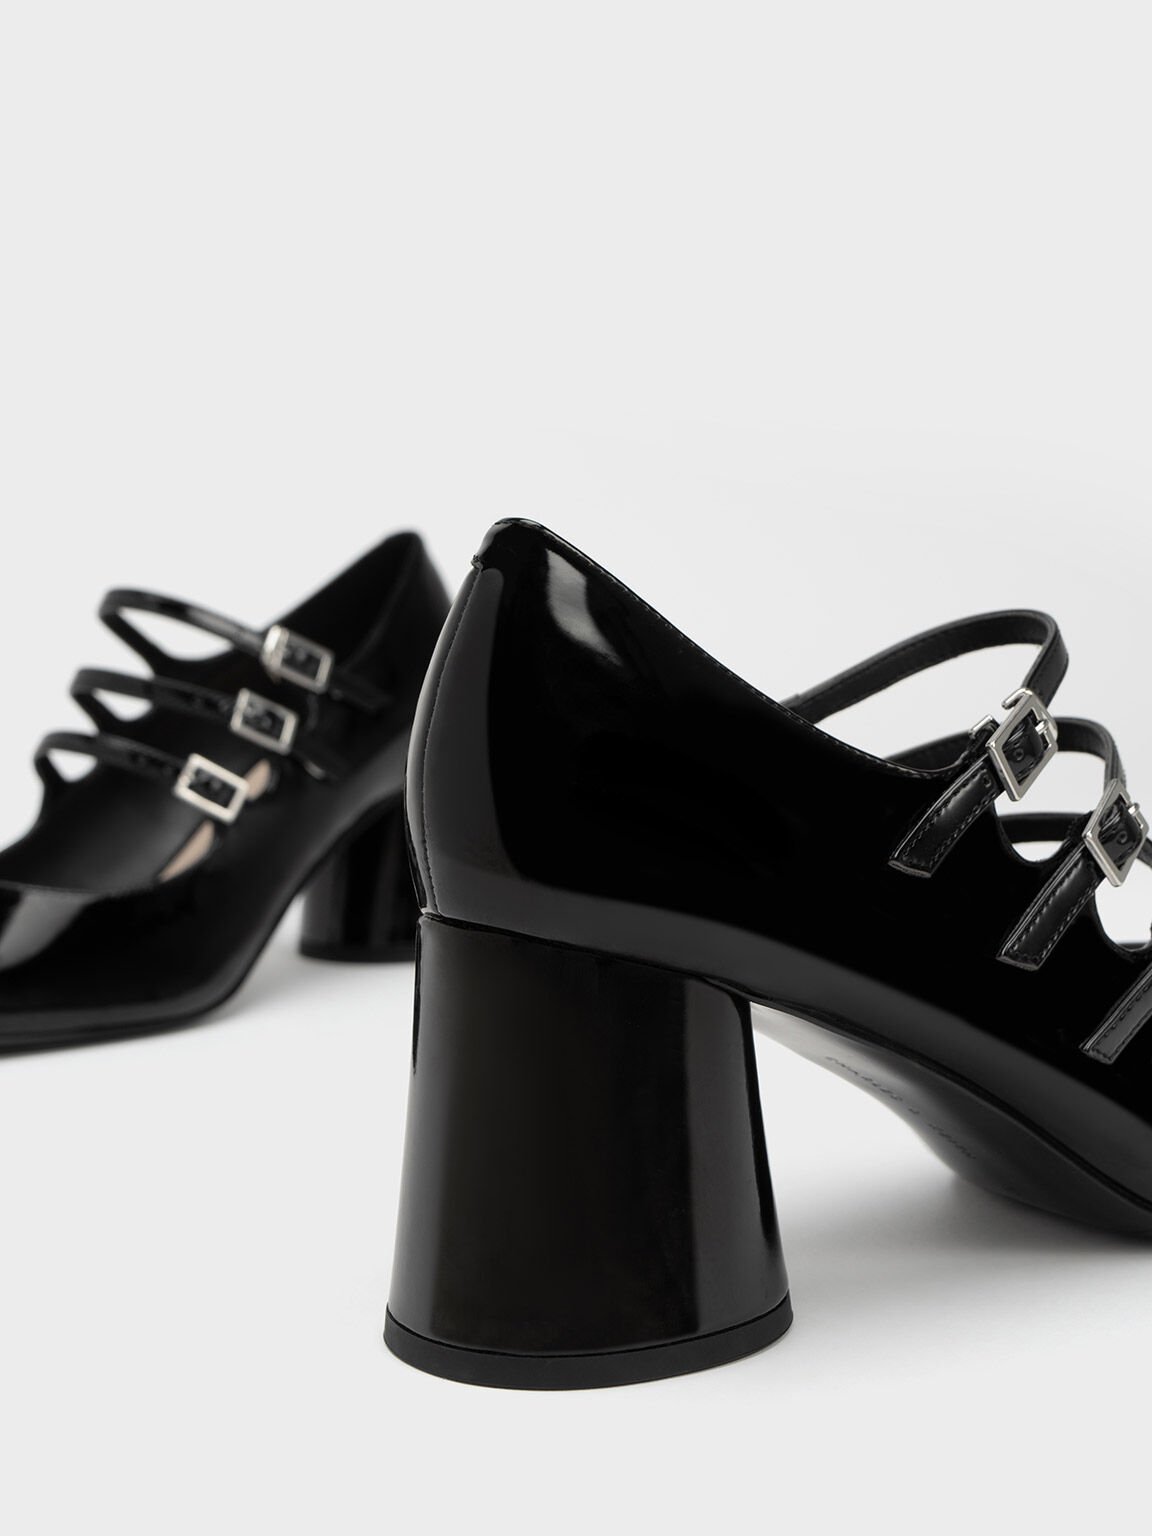 Mary Janes And Clogs  Fall 2021 - CHARLES & KEITH US